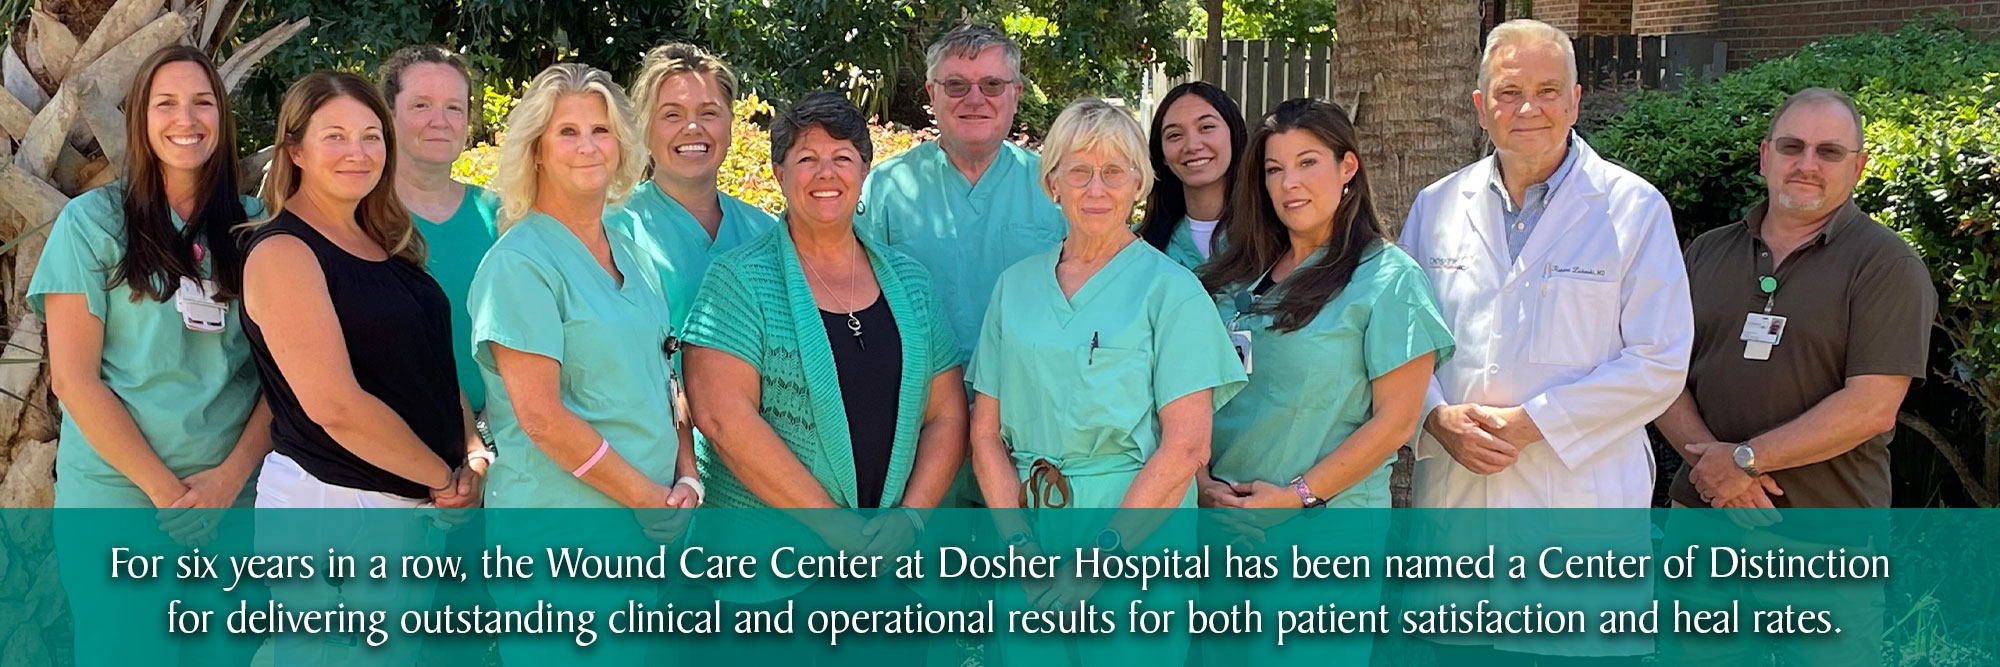 For six years in a row, the Wound Care Center at Dosher Hospital has been named a Center of Distinction for delivering outstanding clinical and operational results for both patient satisfaction and heal rates.